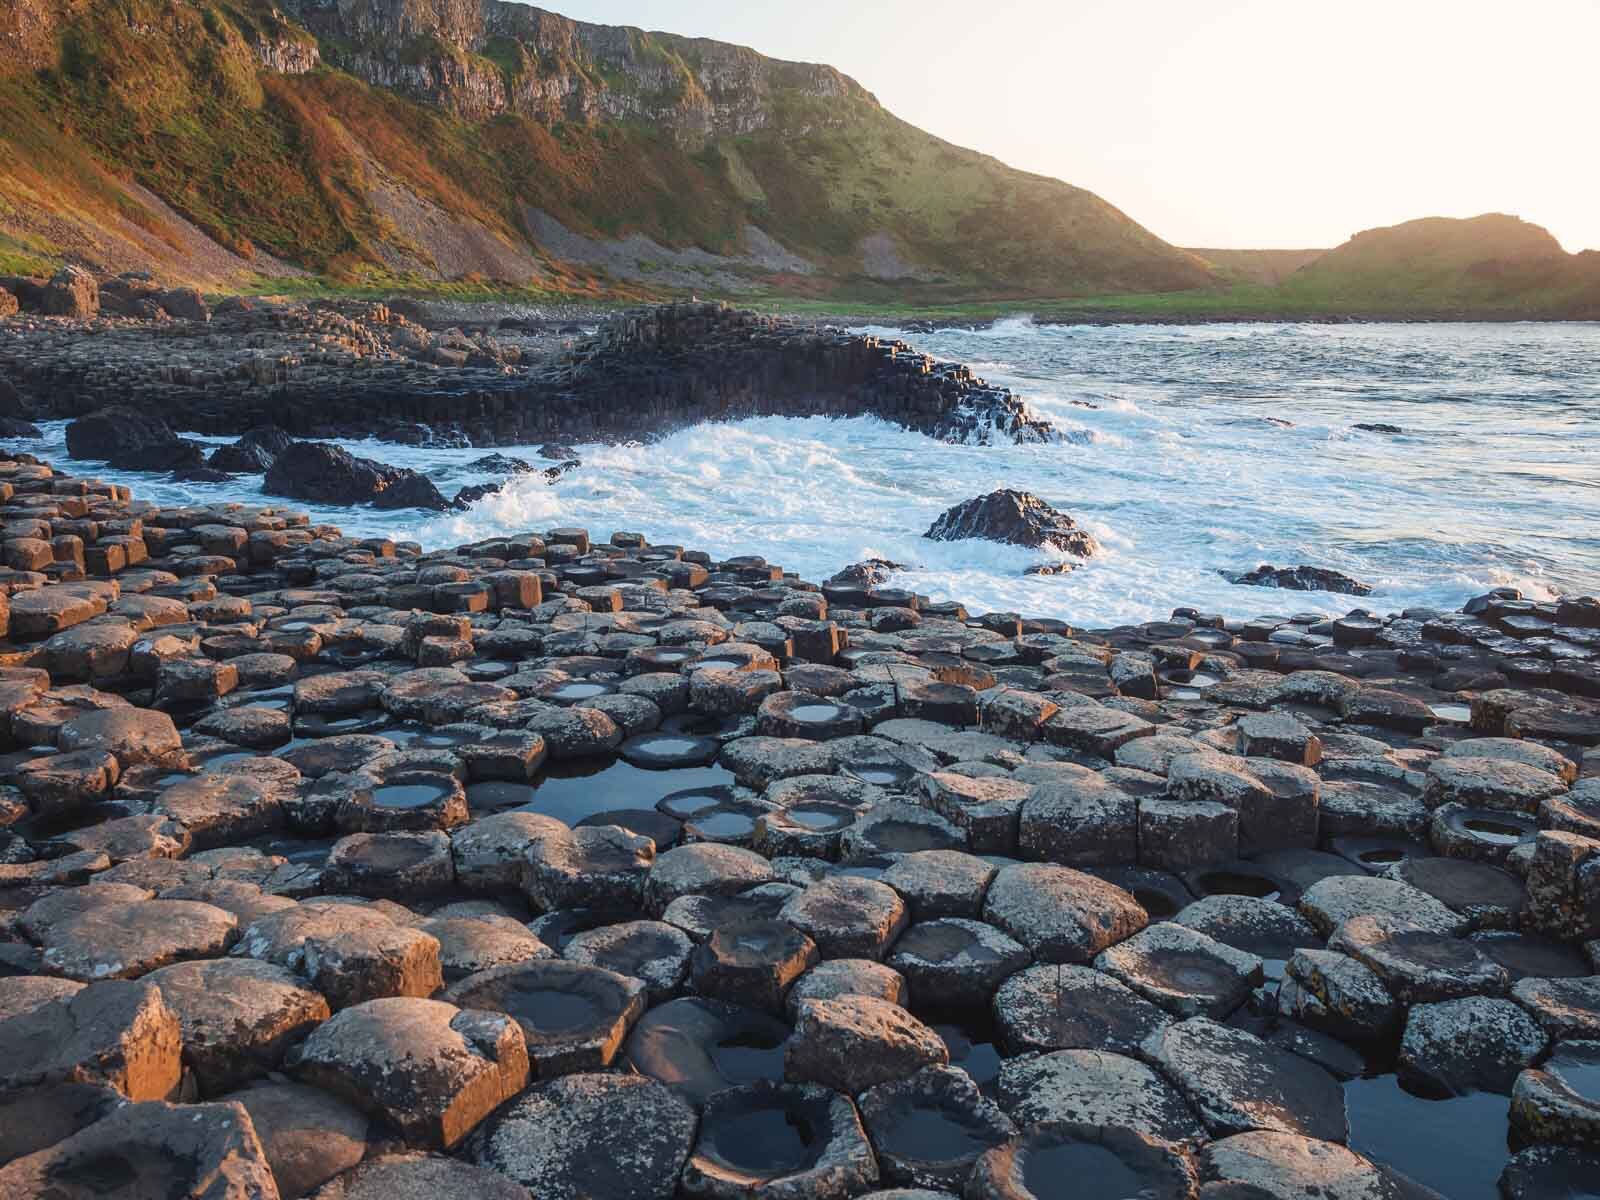 How to visit the Giants Causeway location